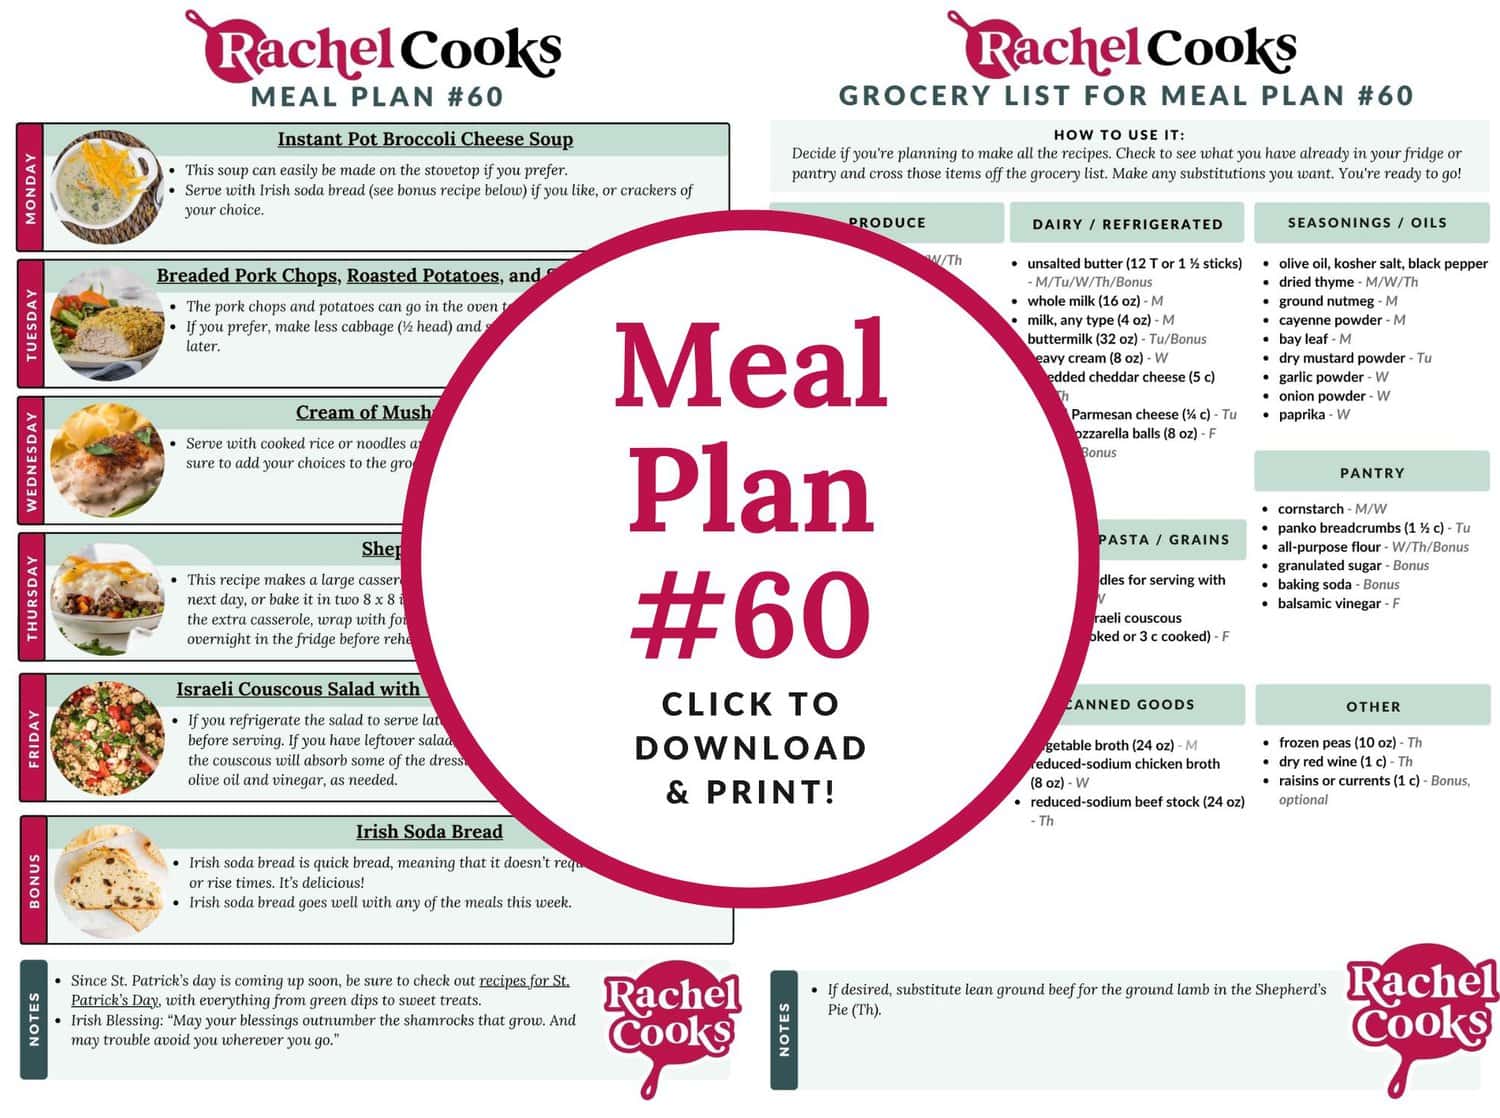 Meal plan 60 preview image showing both pages.